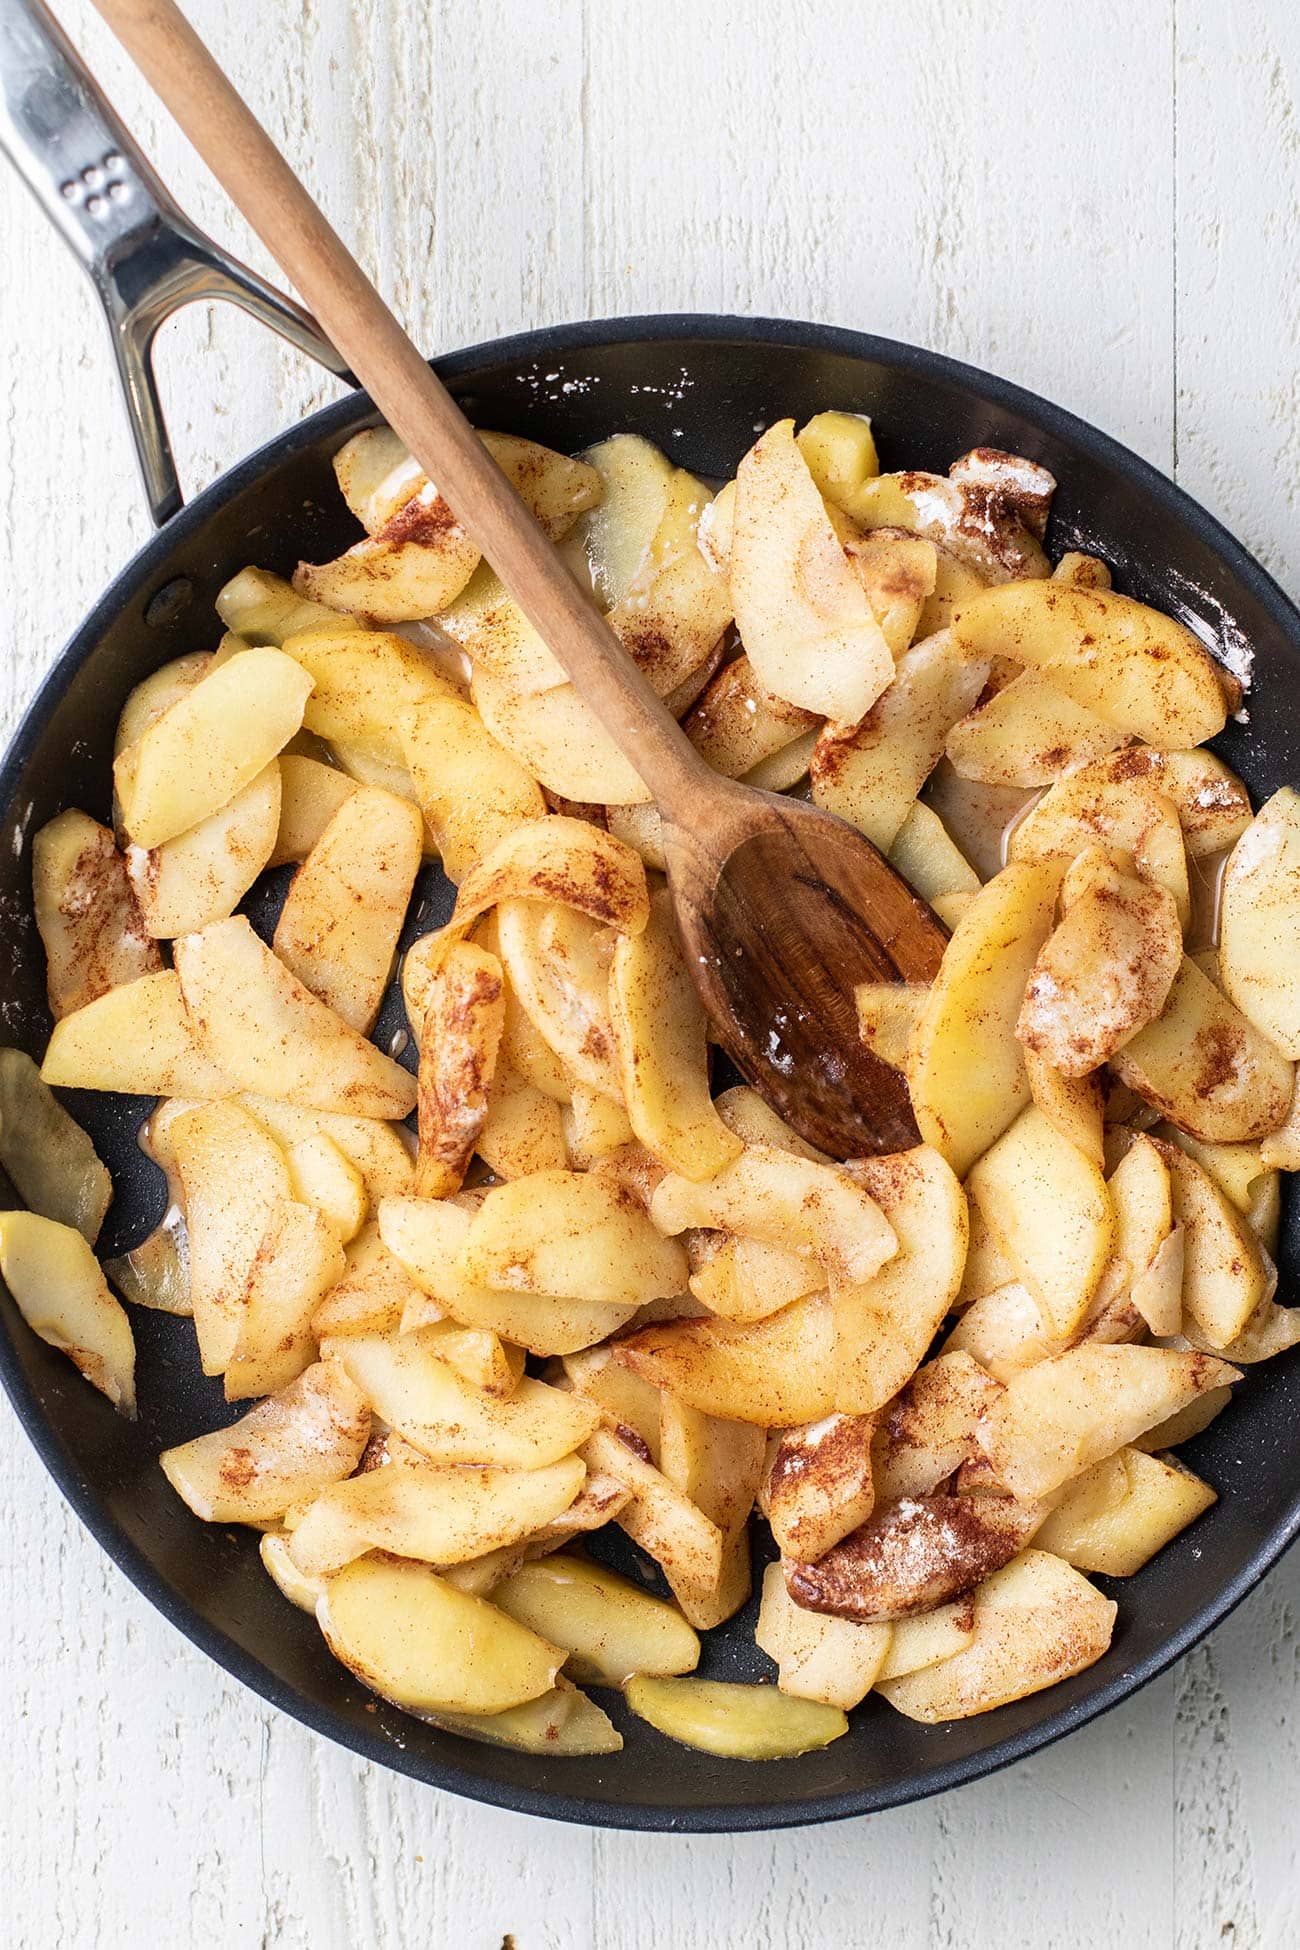 Apple slices in a skillet sprinkled with cinnamon and arrowroot.